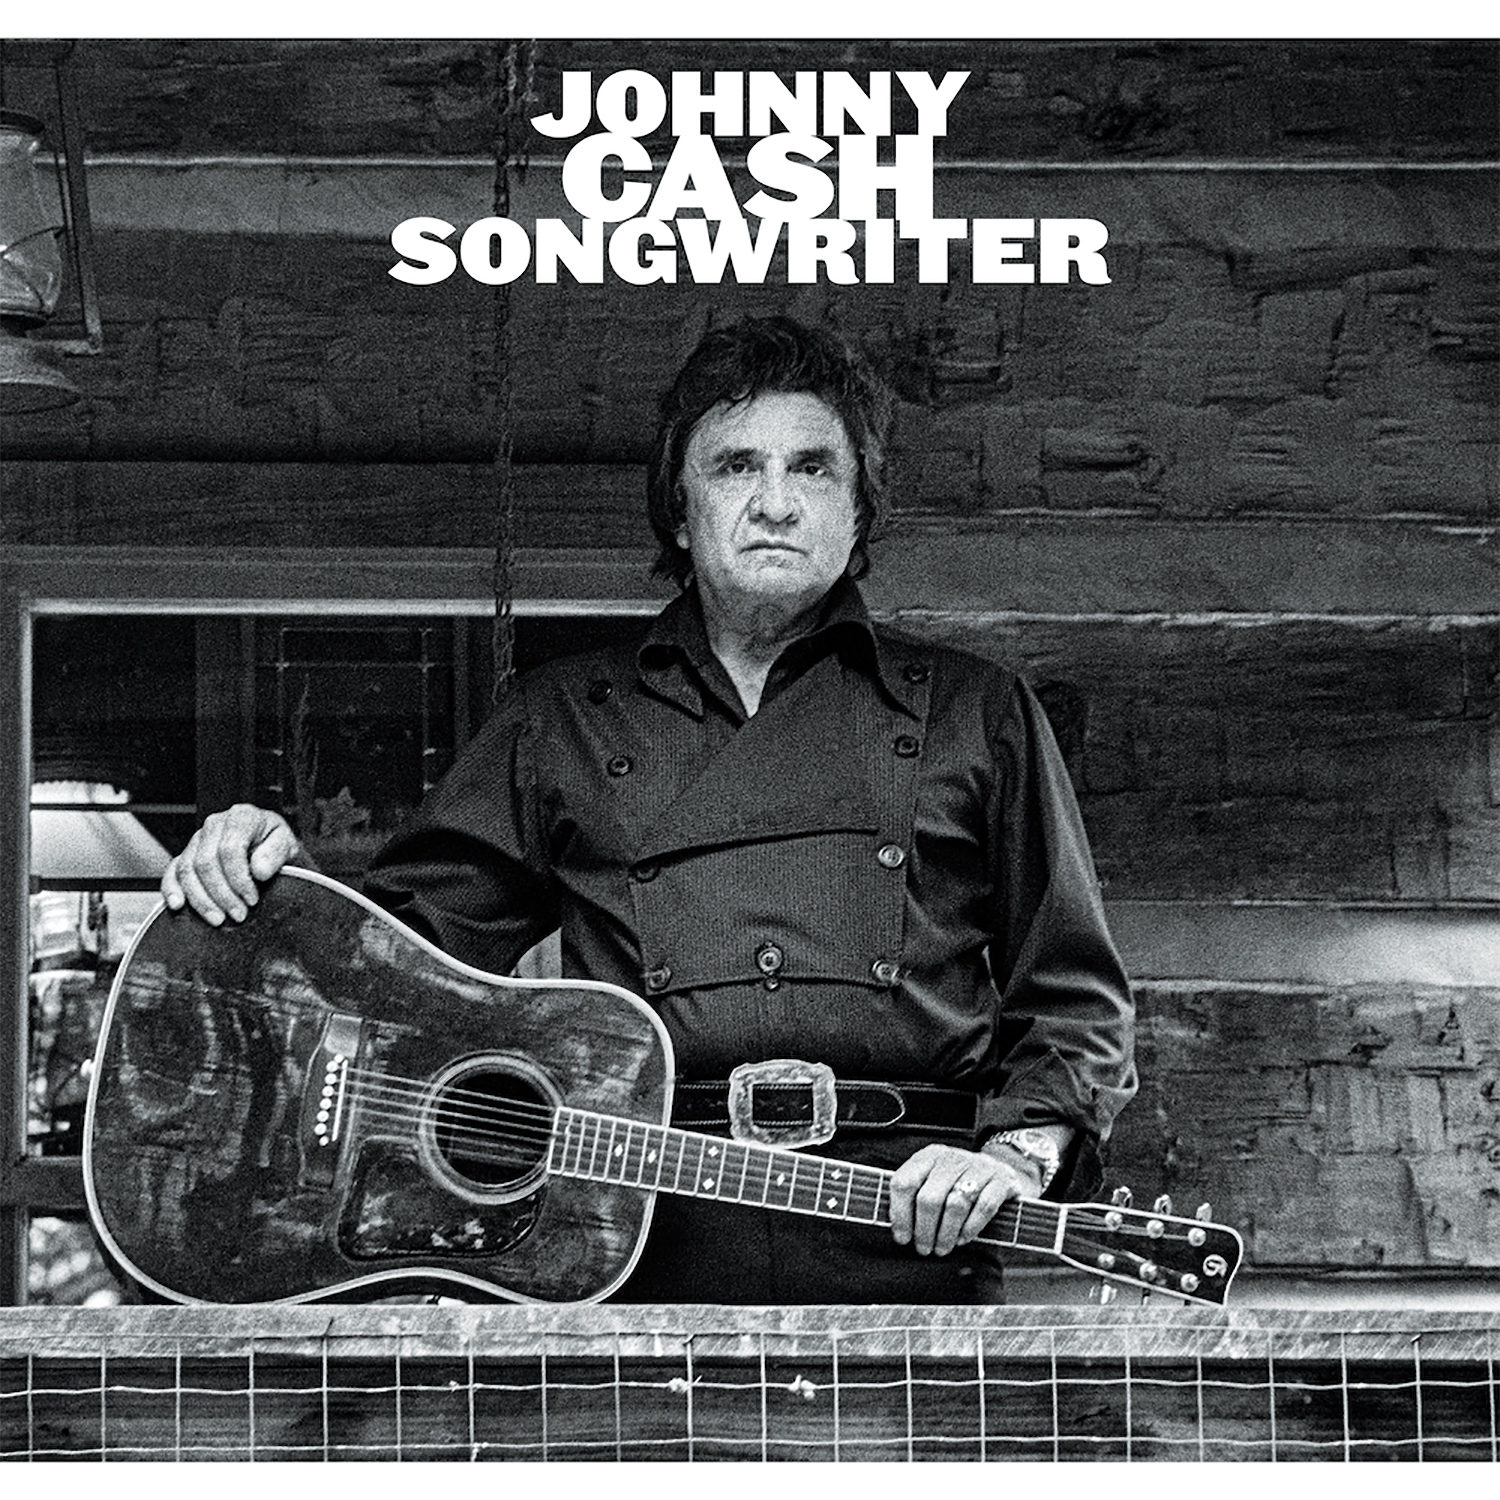 Featured image for “Featured Photos: Johnny Cash SONGWRITER Album”